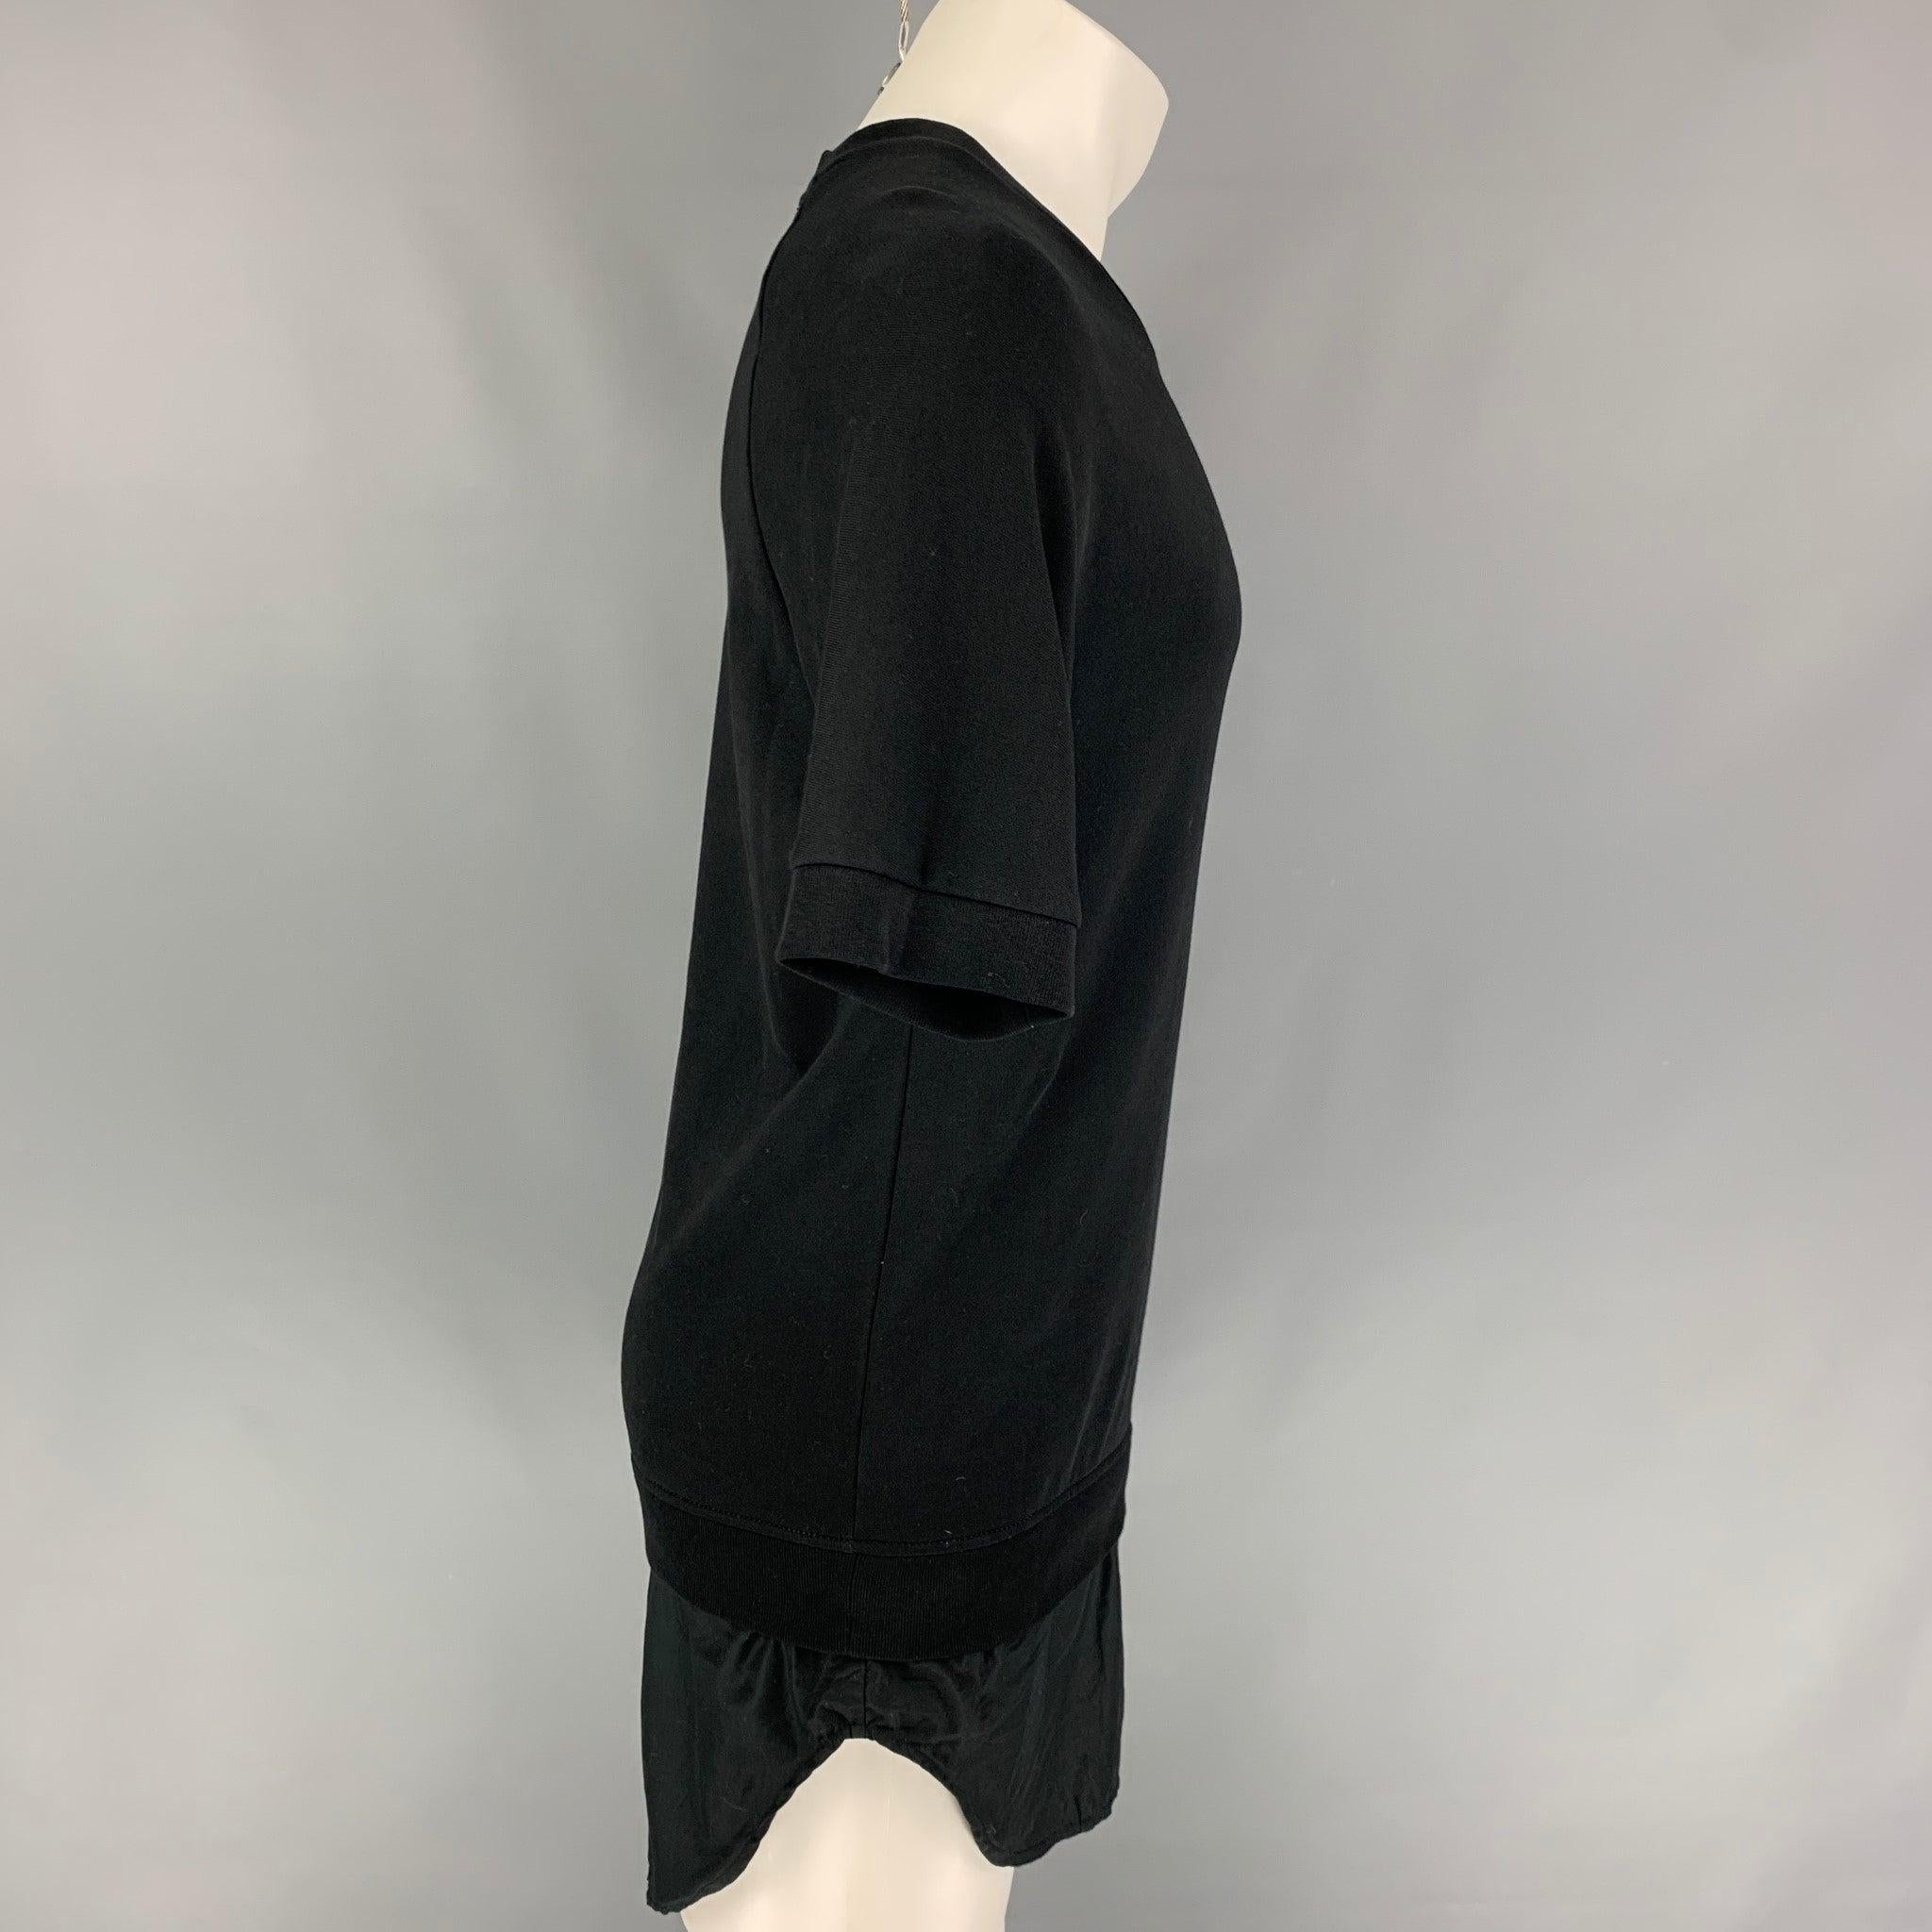 3.1 PHILLIP LIM pullover comes in a black cotton featuring a shirt panel, short sleeves, and a crew-neck.
Very Good
Pre-Owned Condition. 

Marked:   S 

Measurements: 
 
Shoulder: 16.5 inches  Chest: 40 inches  Sleeve: 11 inches  Length: 35 inches 
